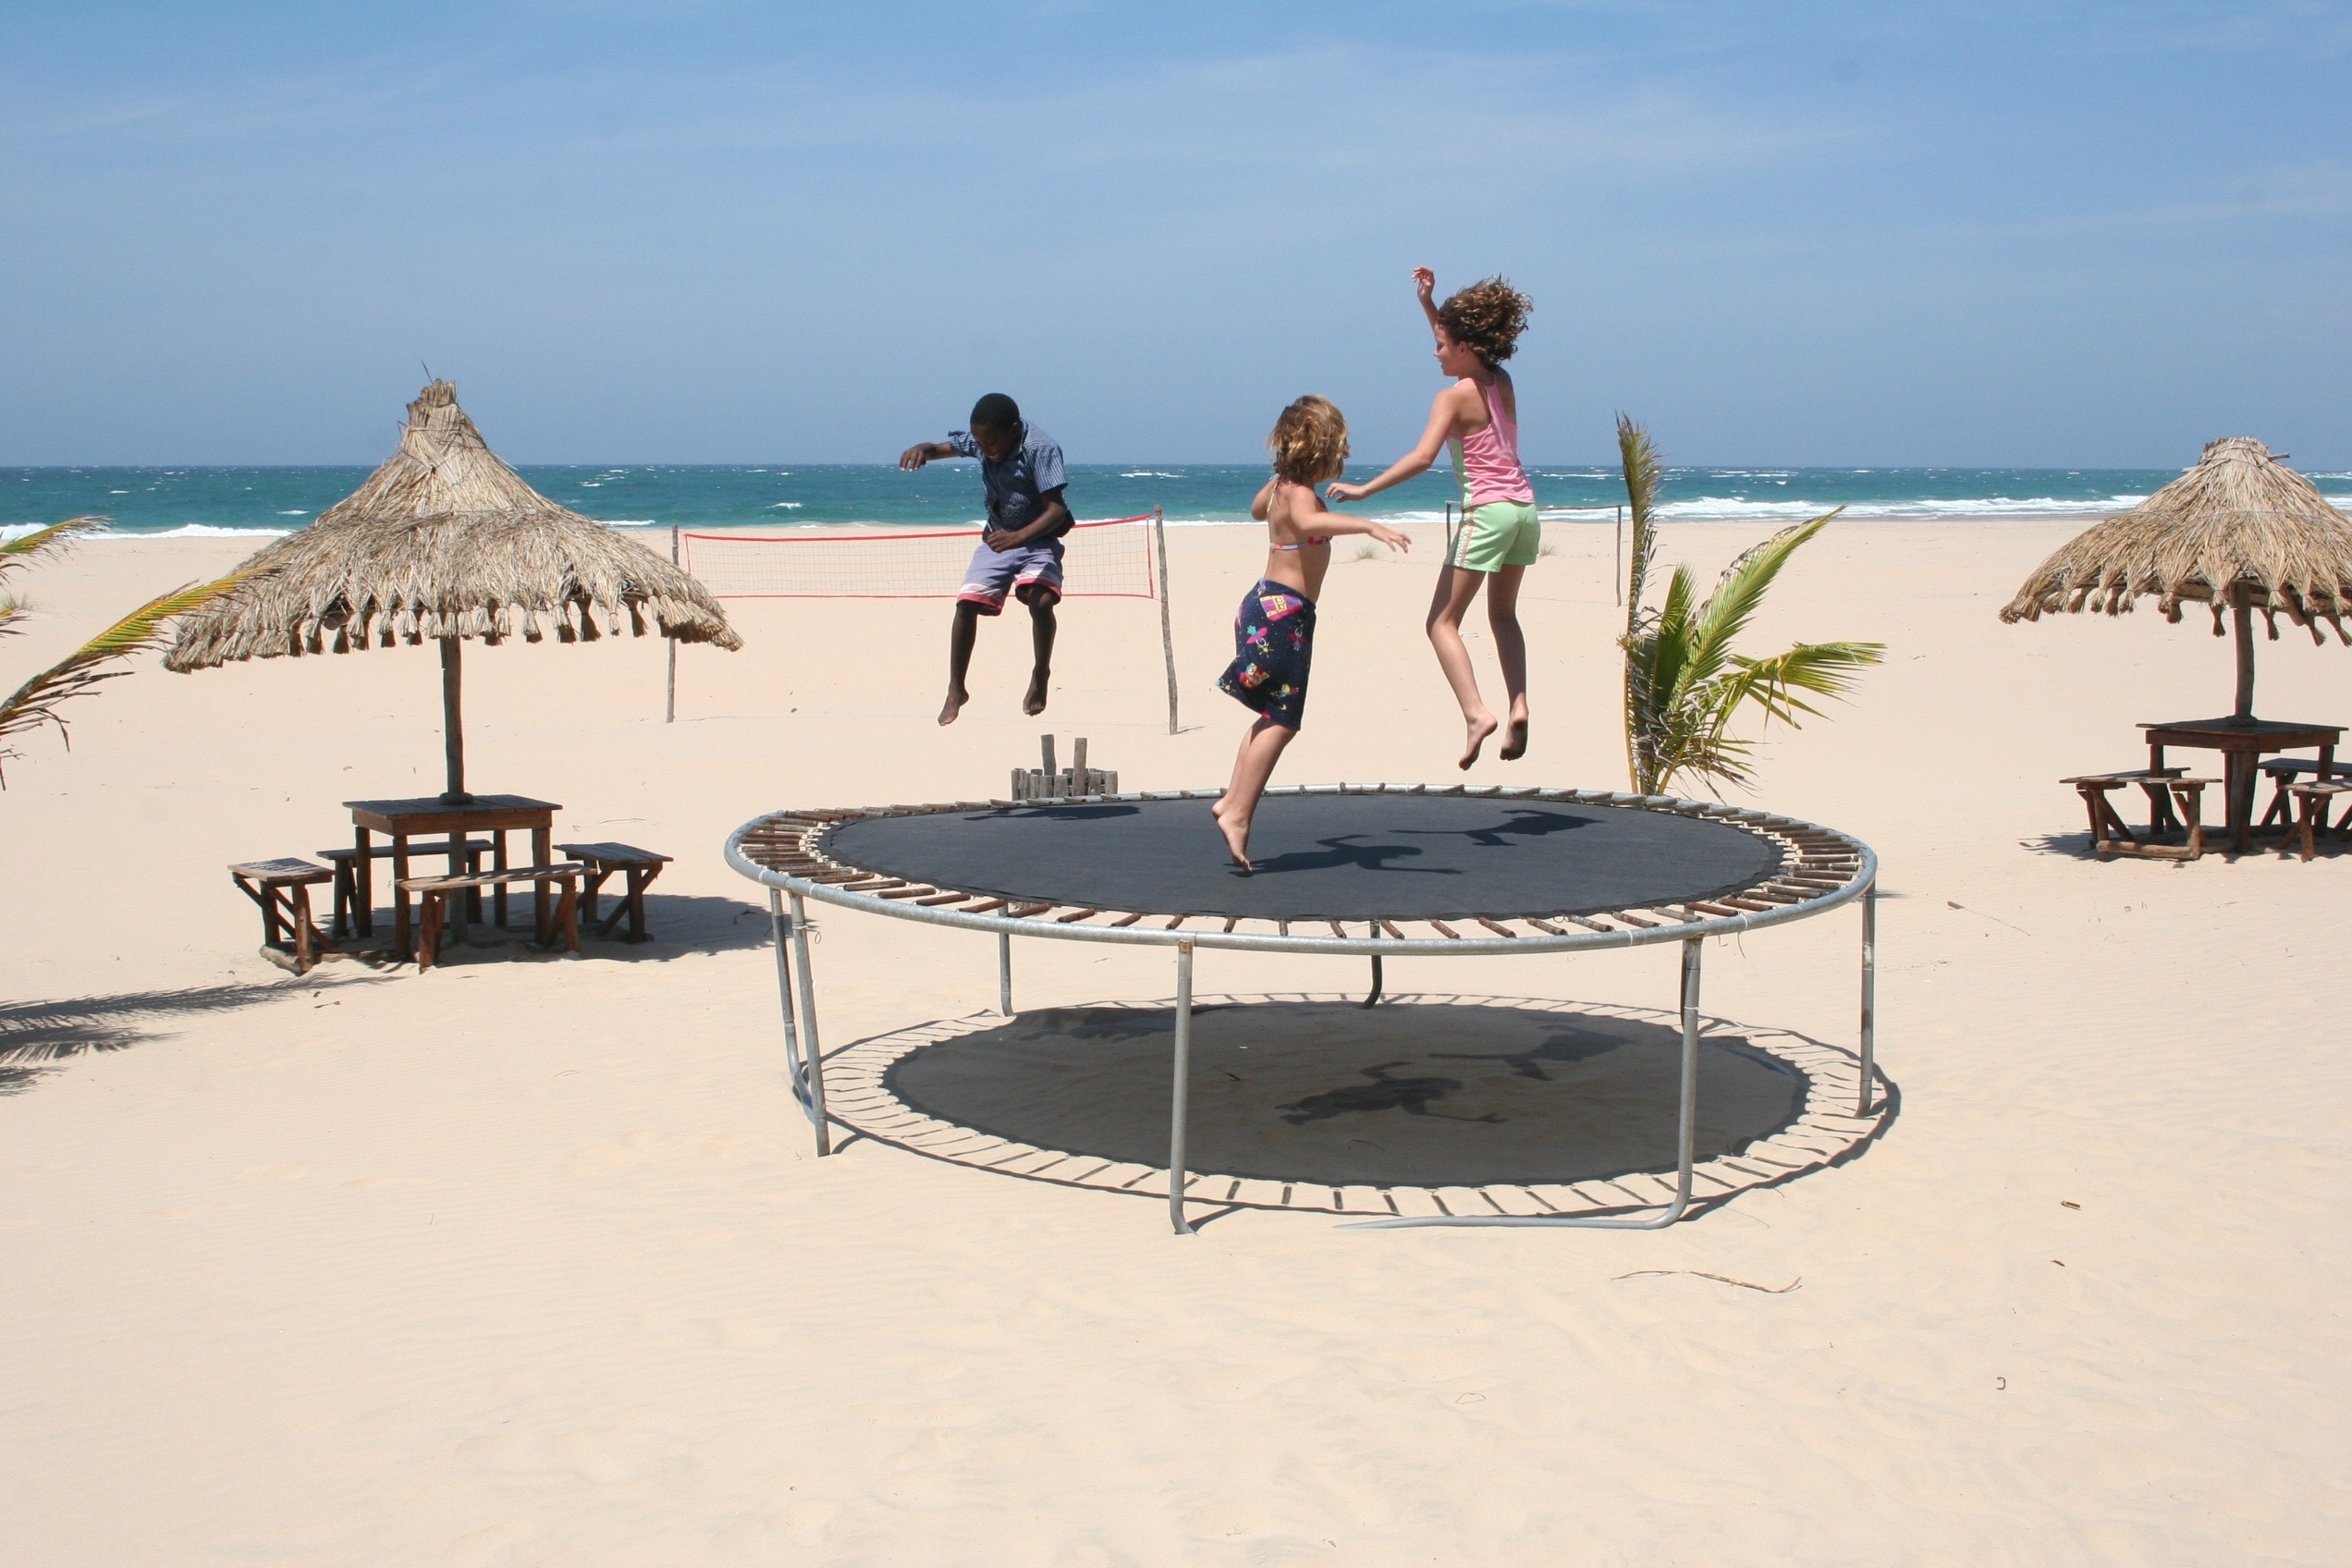 Trampolining: A group of children having pleasure while jumping on a beach trampoline, A family sport. 2550x1700 HD Wallpaper.